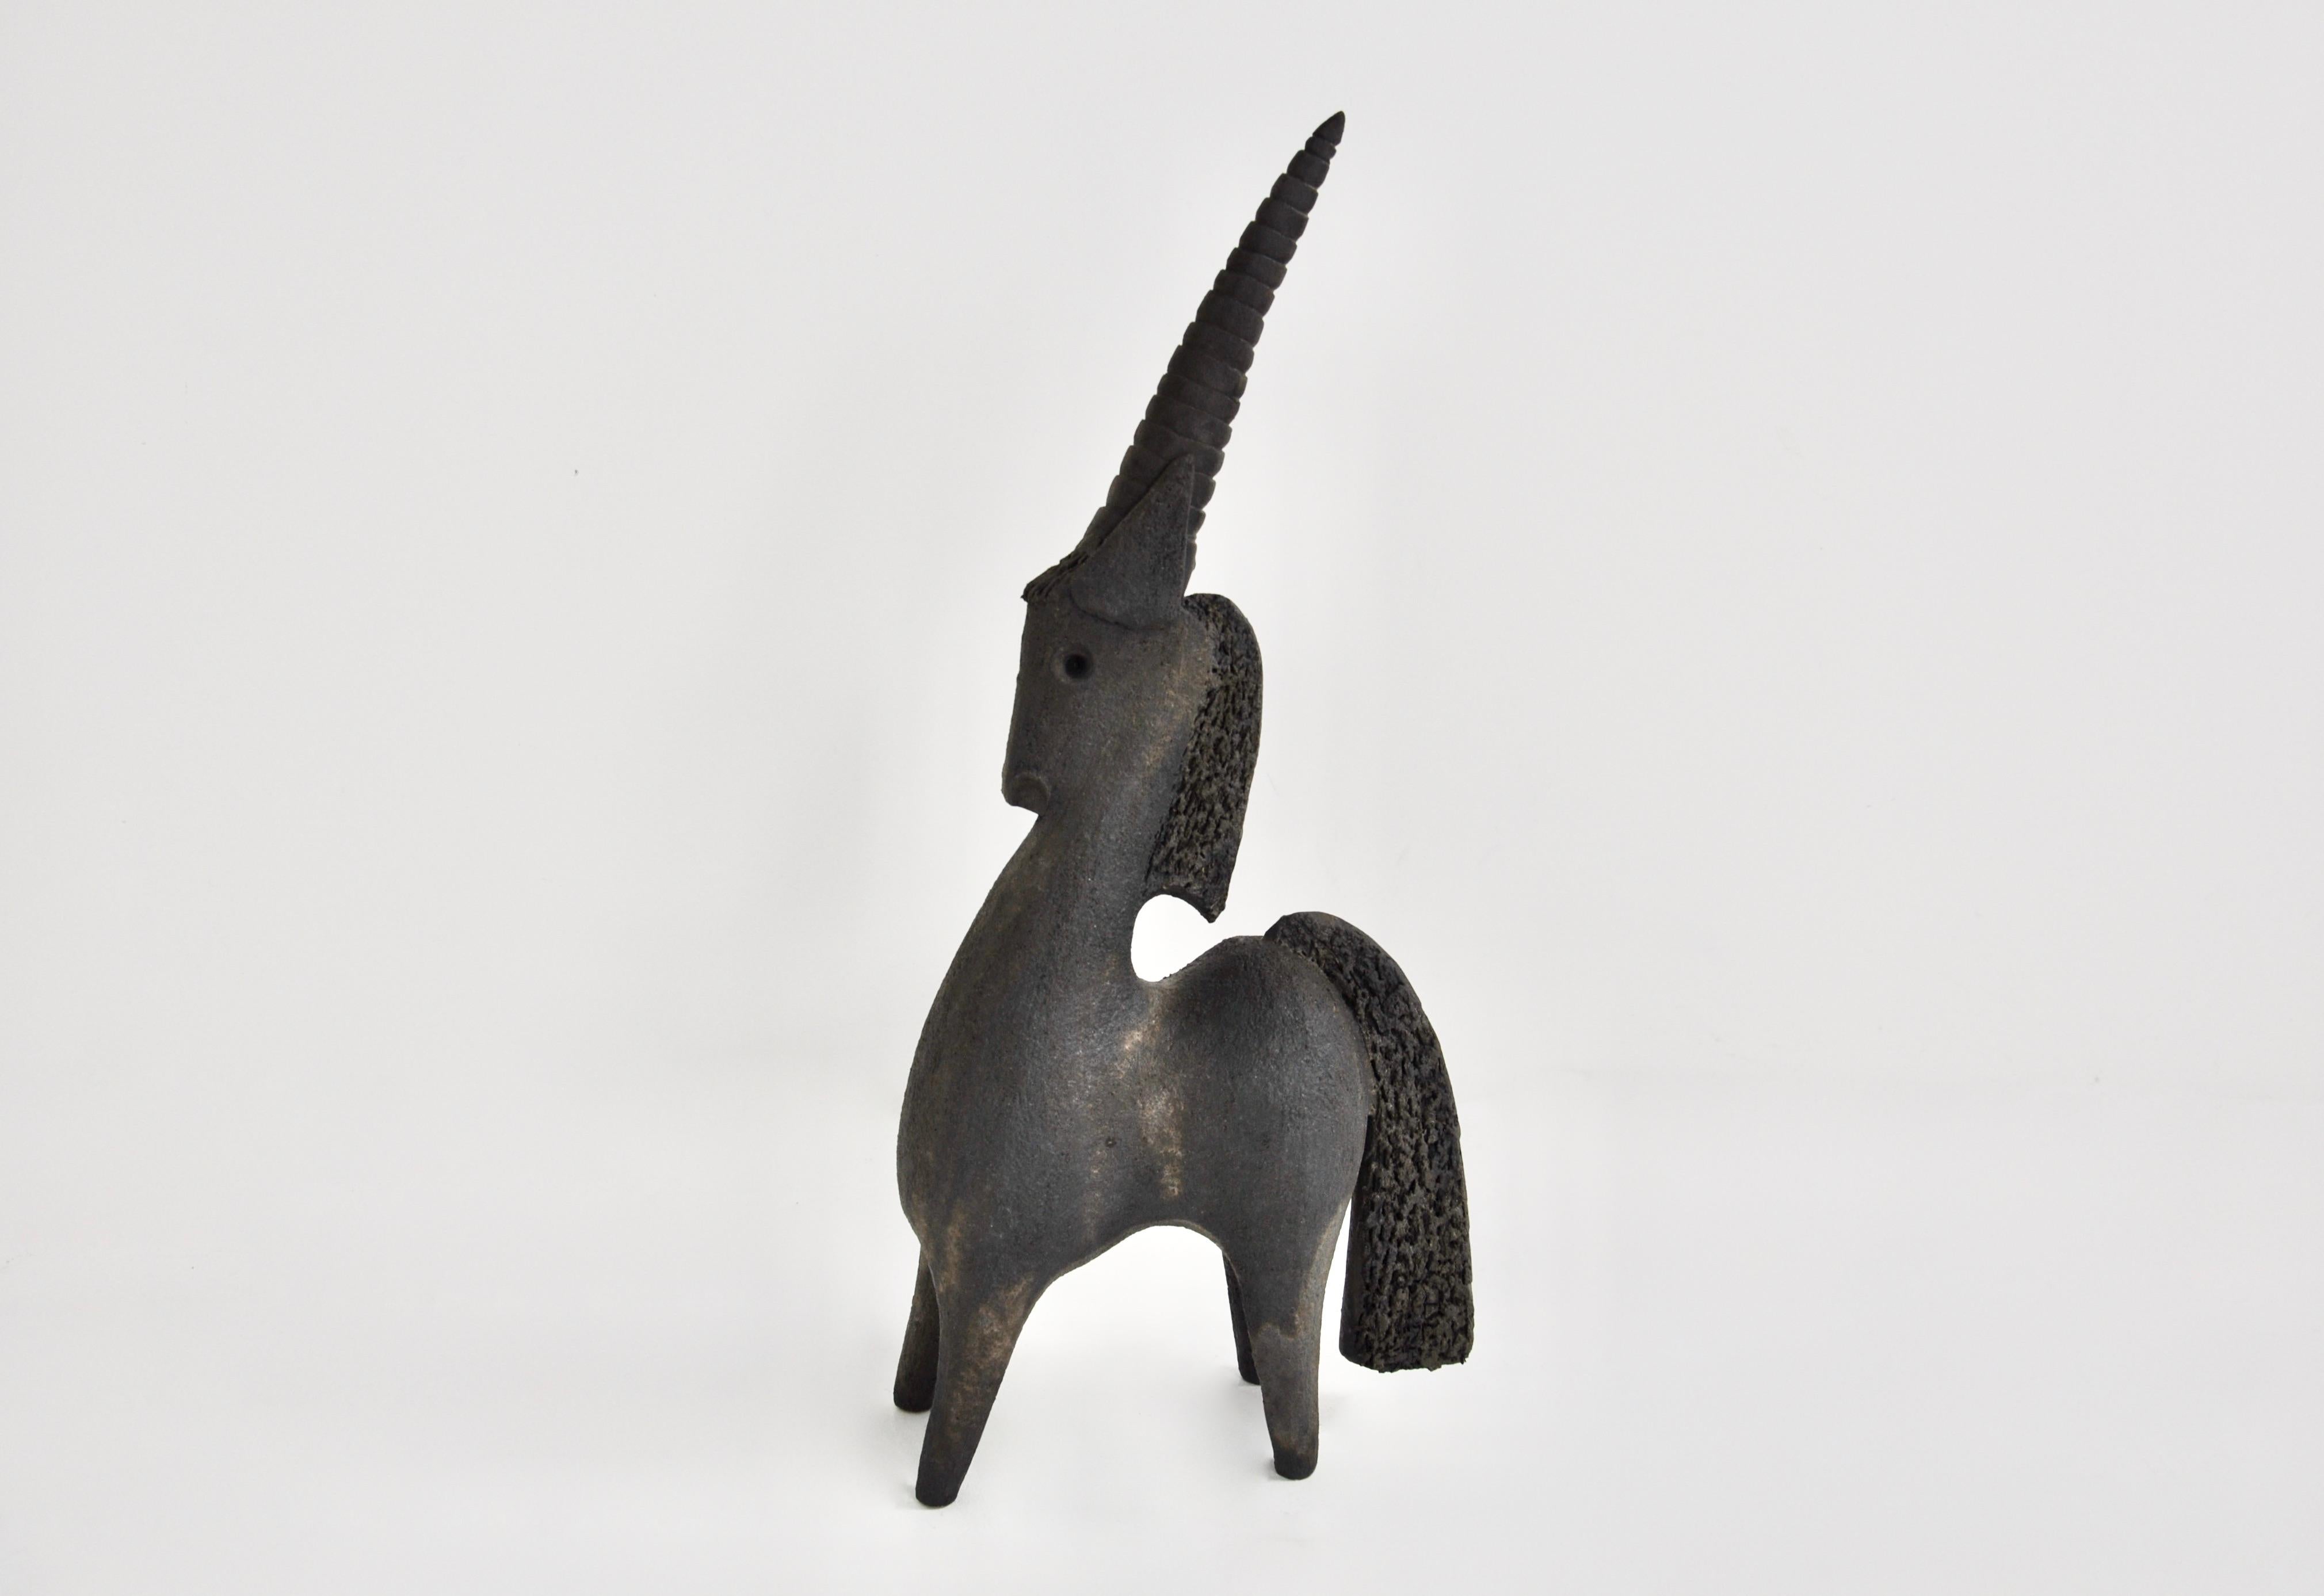 Ceramic in the shape of a unicorn designed by Dominique Pouchain. Stamped on the back.